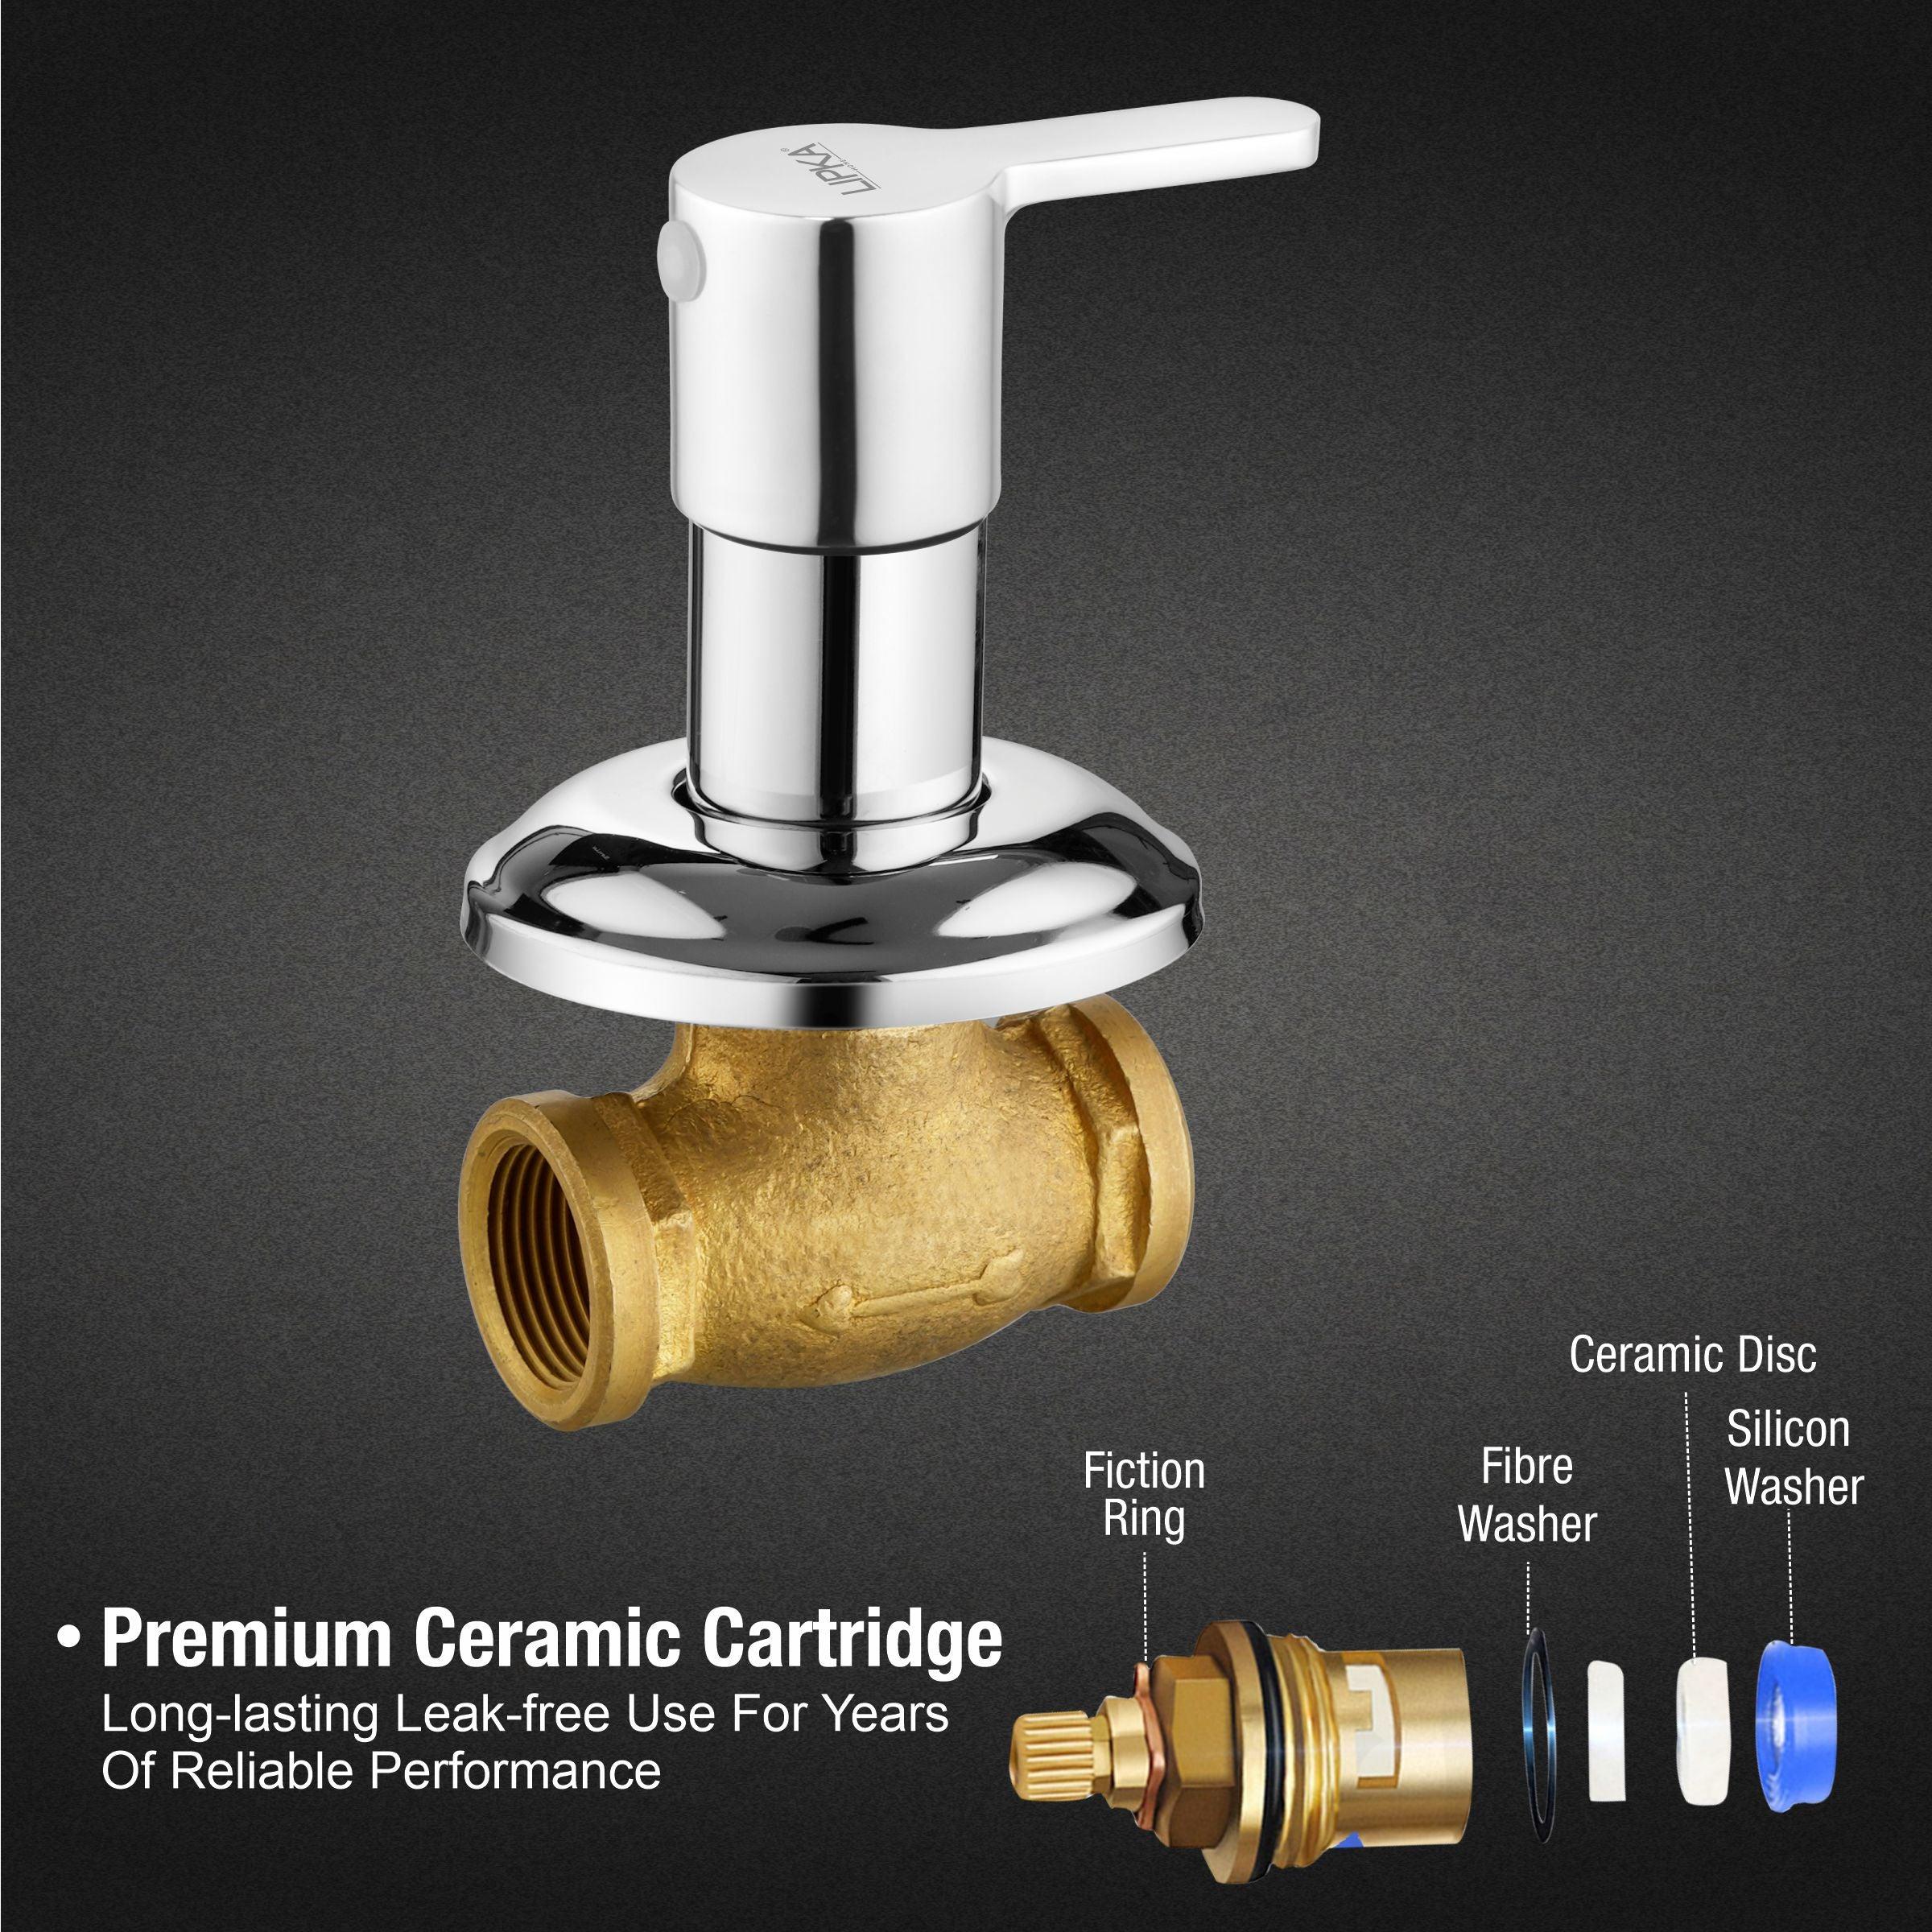 Fusion Concealed Stop Valve (15mm) Brass Faucet - LIPKA - Lipka Home